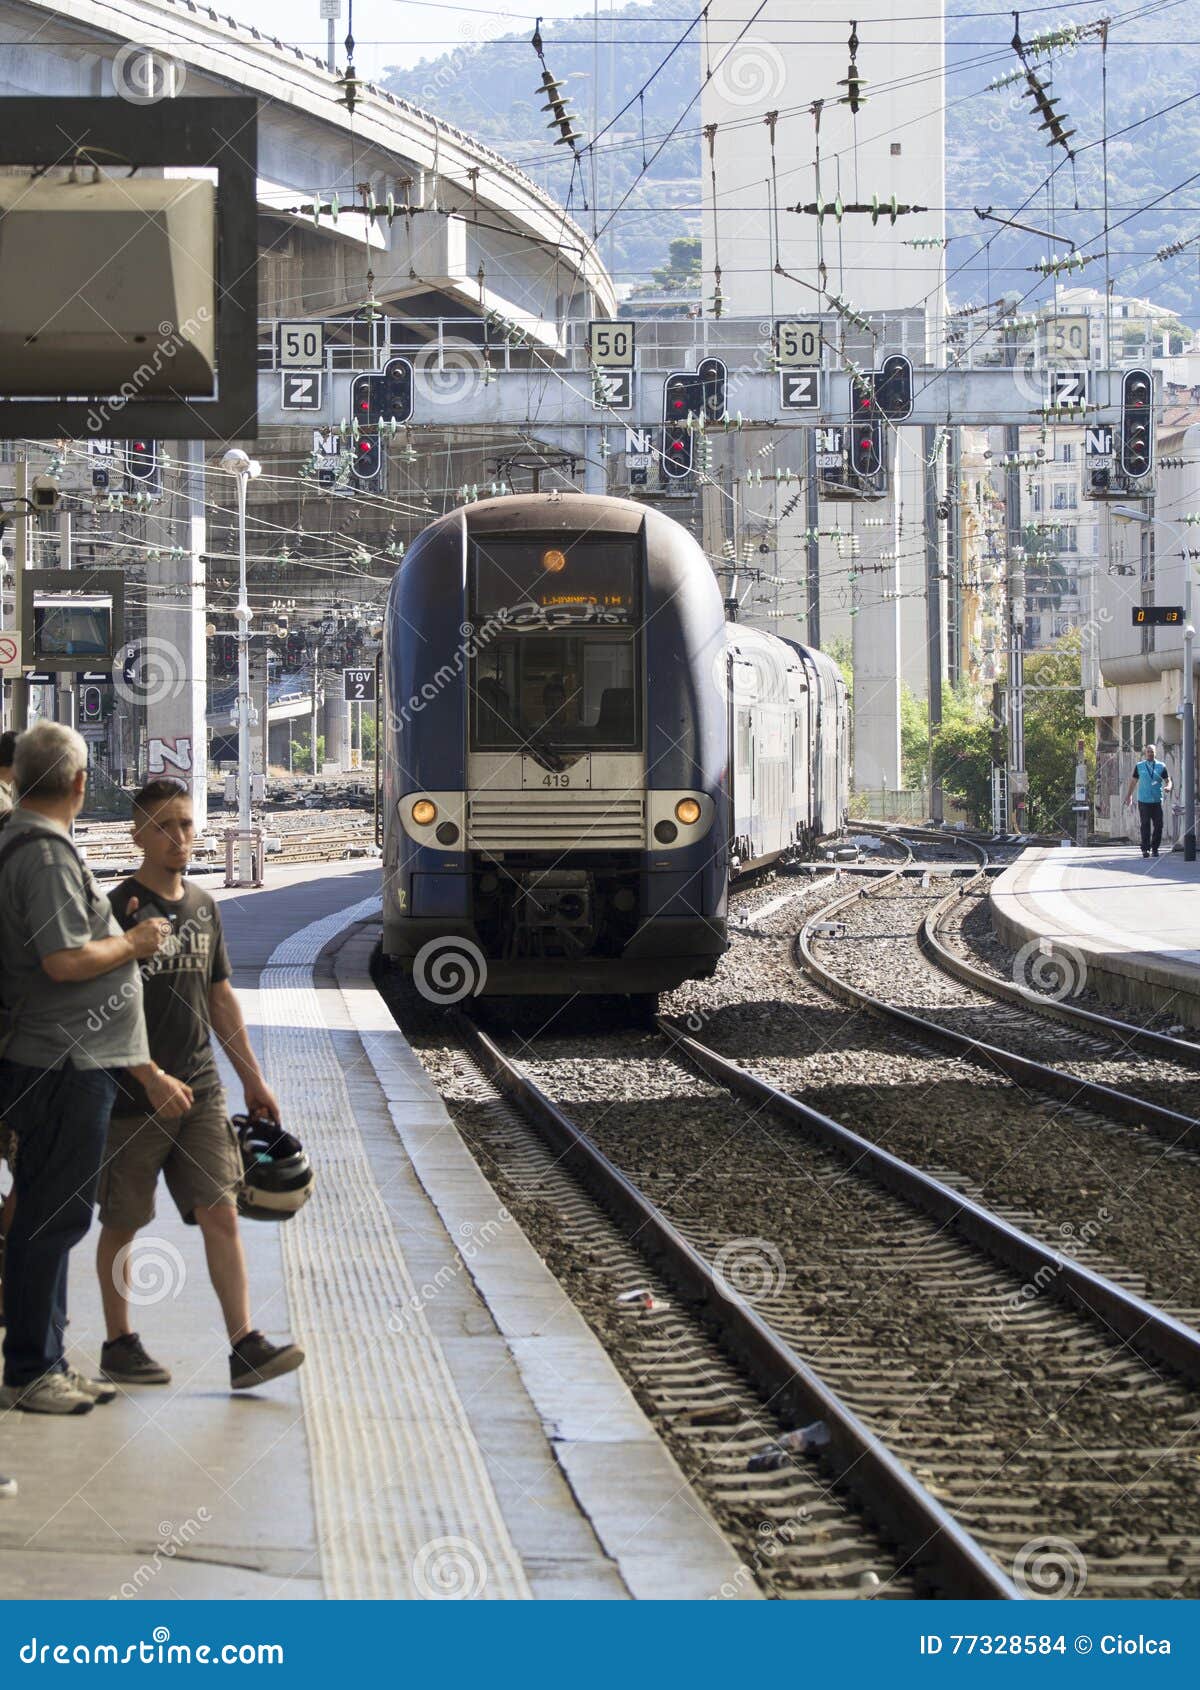 Train Station In Nice France Editorial Stock Image Image Of Alpes